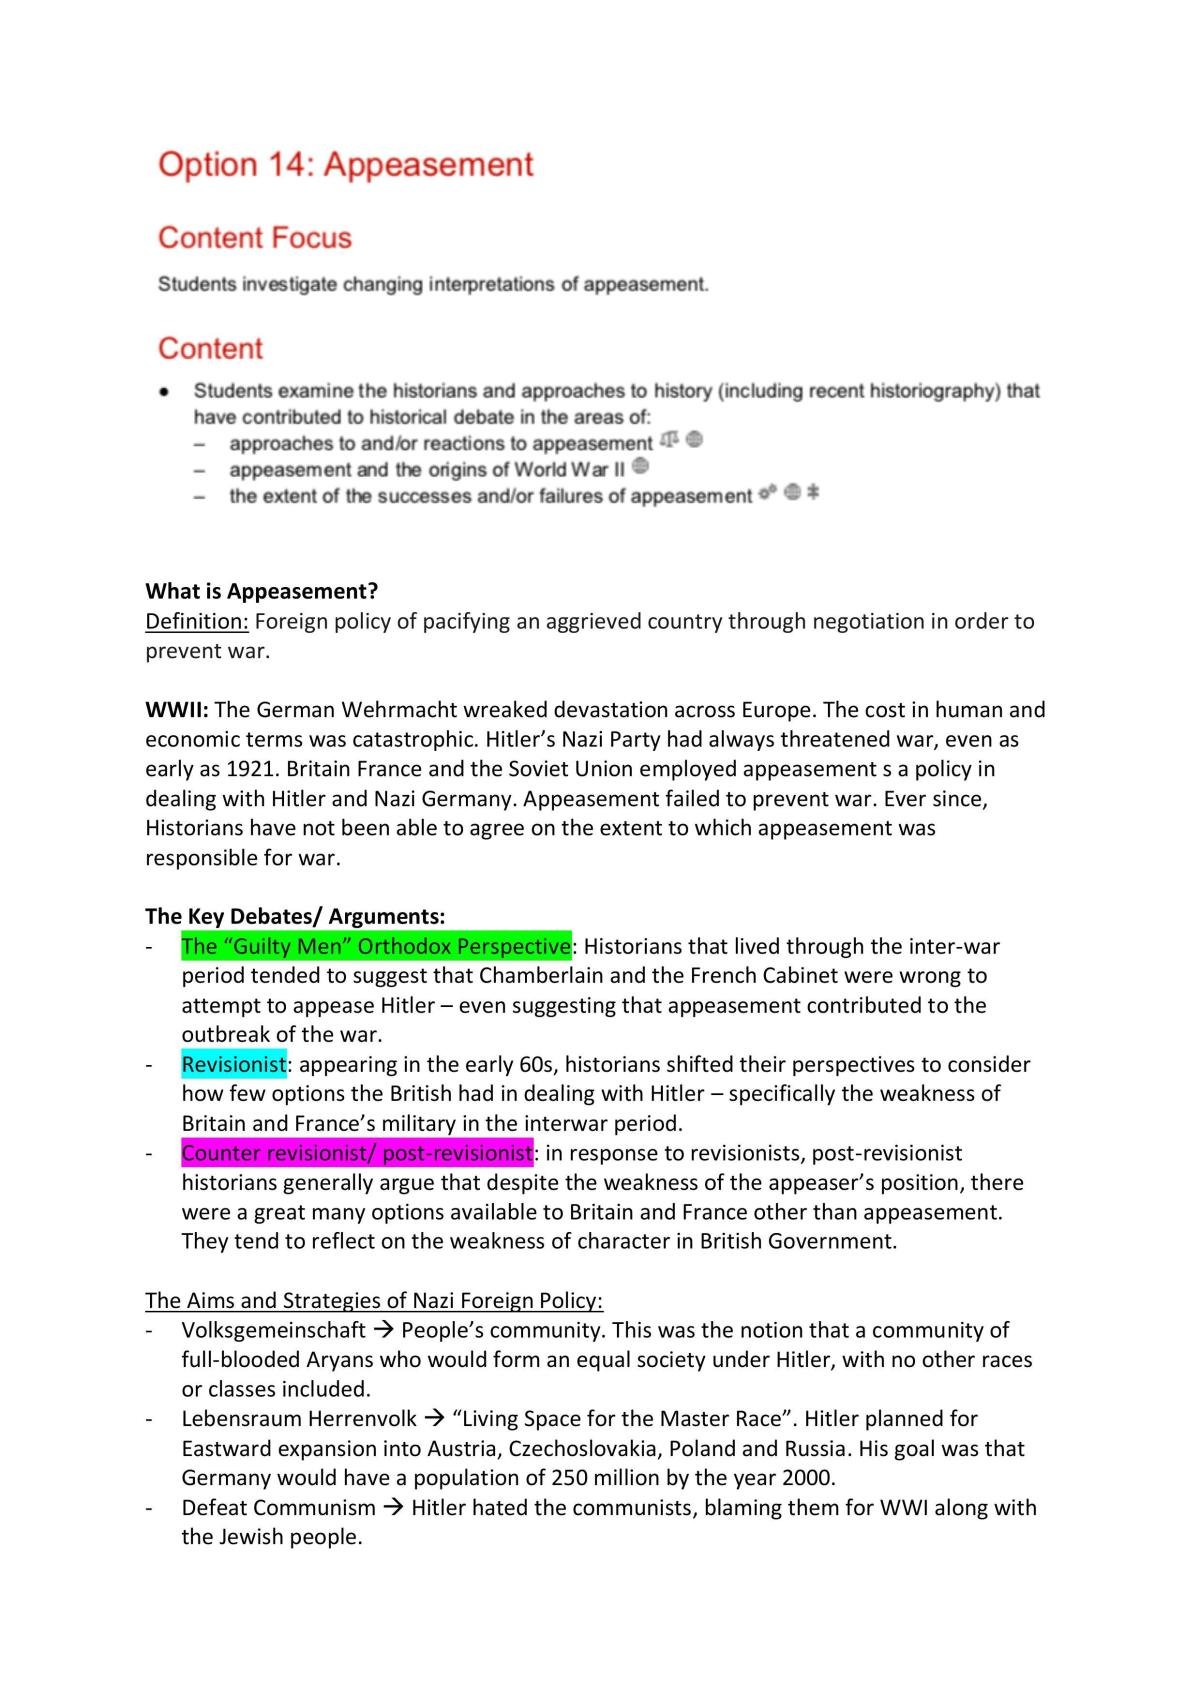 History Extension Complete Study Notes for Appeasement  - Page 1